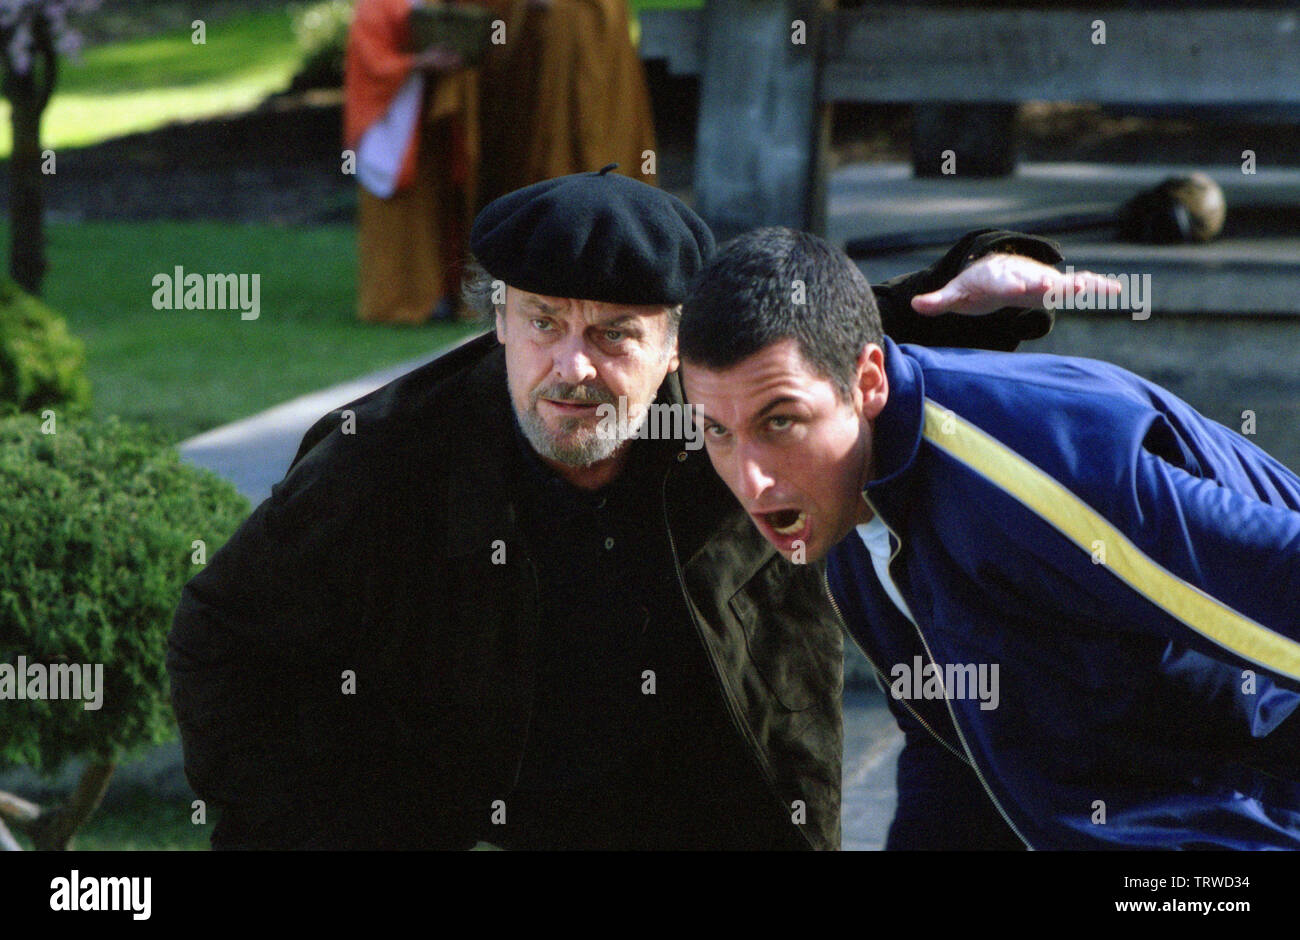 ADAM SANDLER and JACK NICHOLSON in ANGER MANAGEMENT (2003). Copyright: Editorial use only. No merchandising or book covers. This is a publicly distributed handout. Access rights only, no license of copyright provided. Only to be reproduced in conjunction with promotion of this film. Credit: COLUMBIA PICTURES / Album Stock Photo